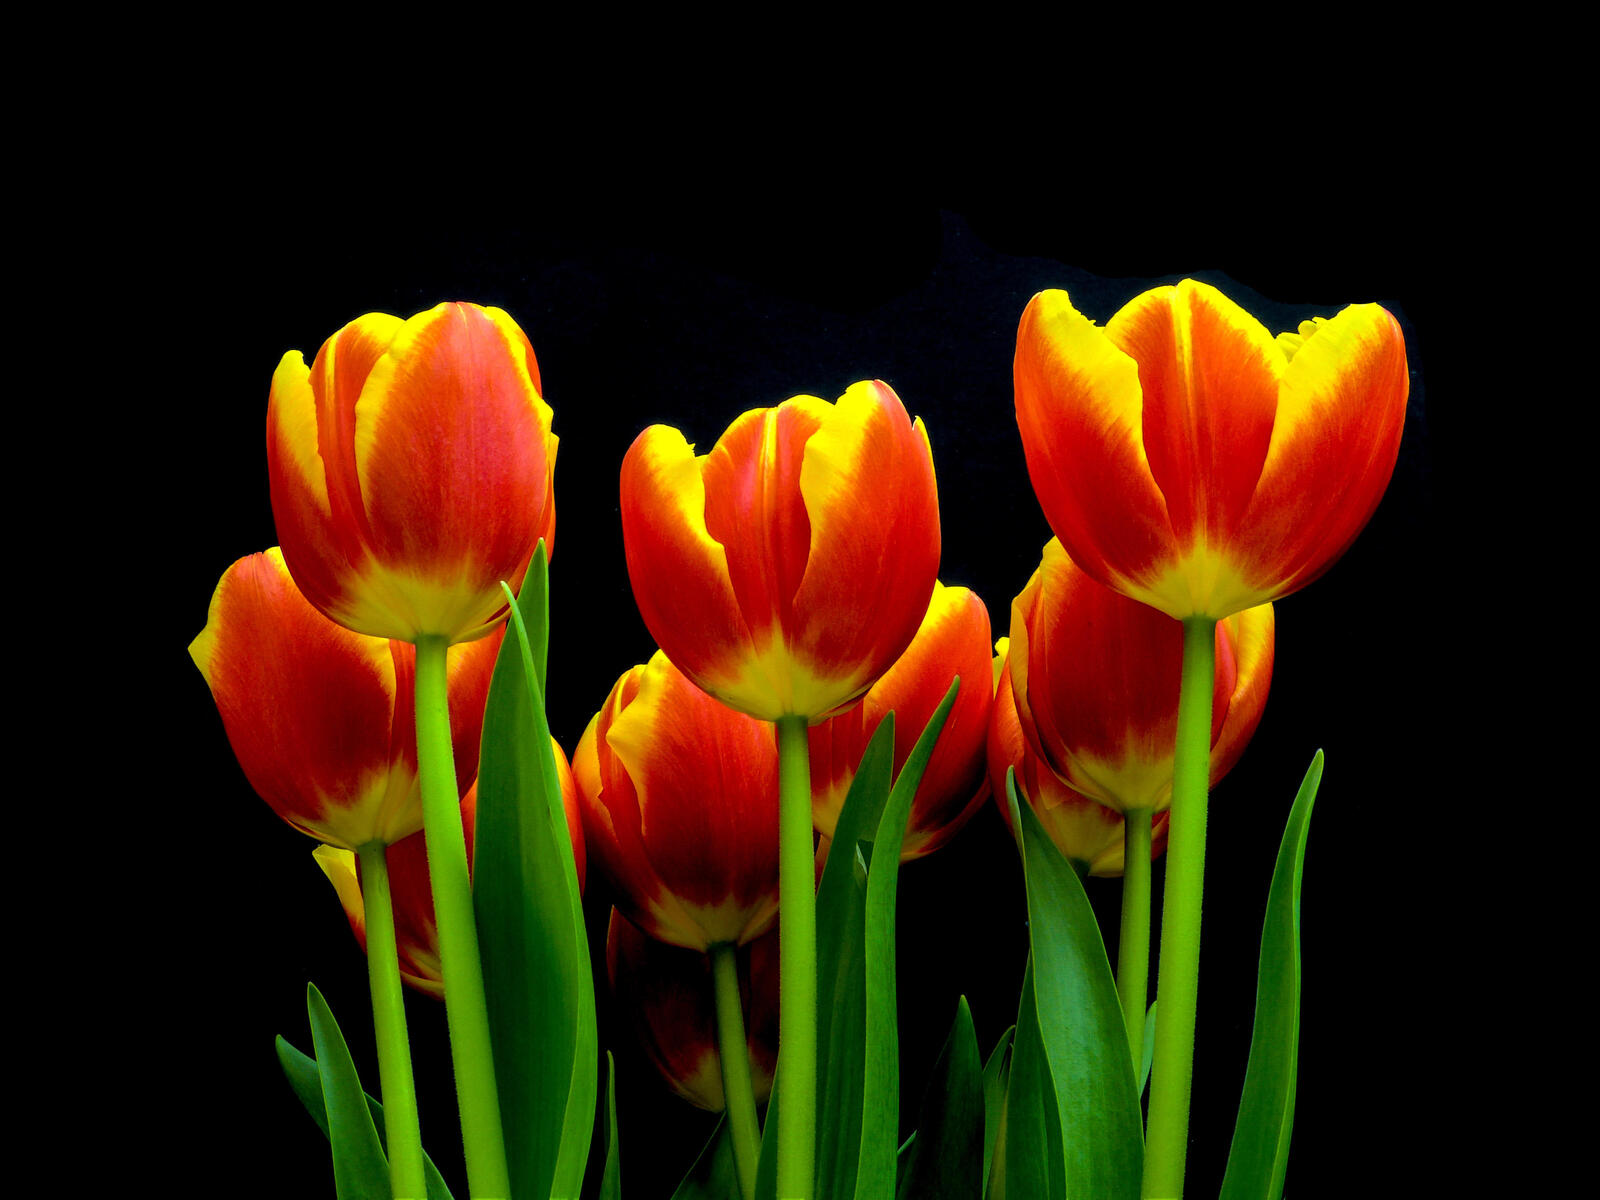 Wallpapers tulips buds red tulips on the desktop